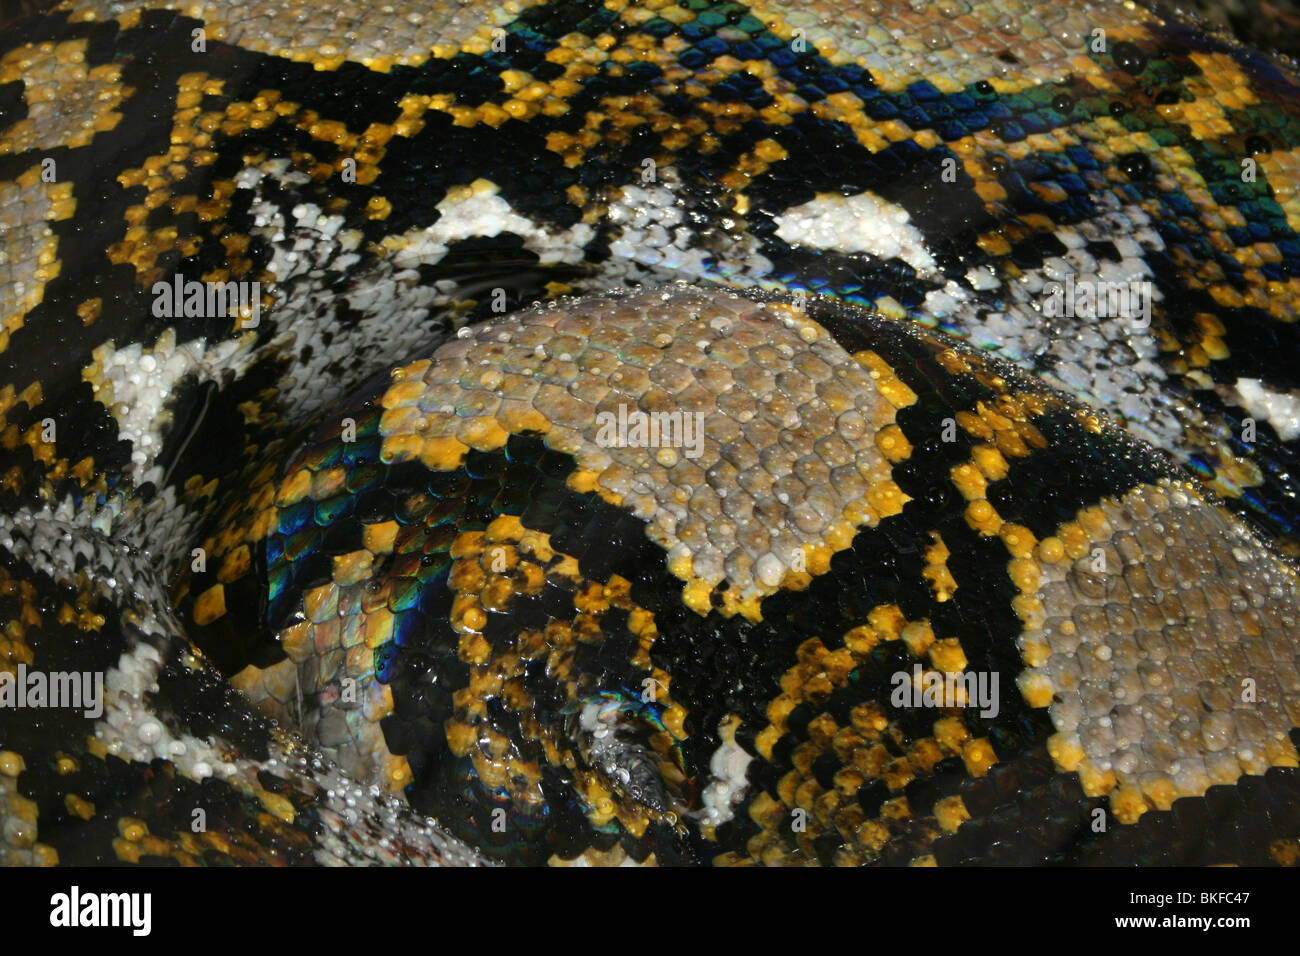 Skin Pattern On Reticulated Python Python reticulatus Taken at Chester Zoo, UK Stock Photo